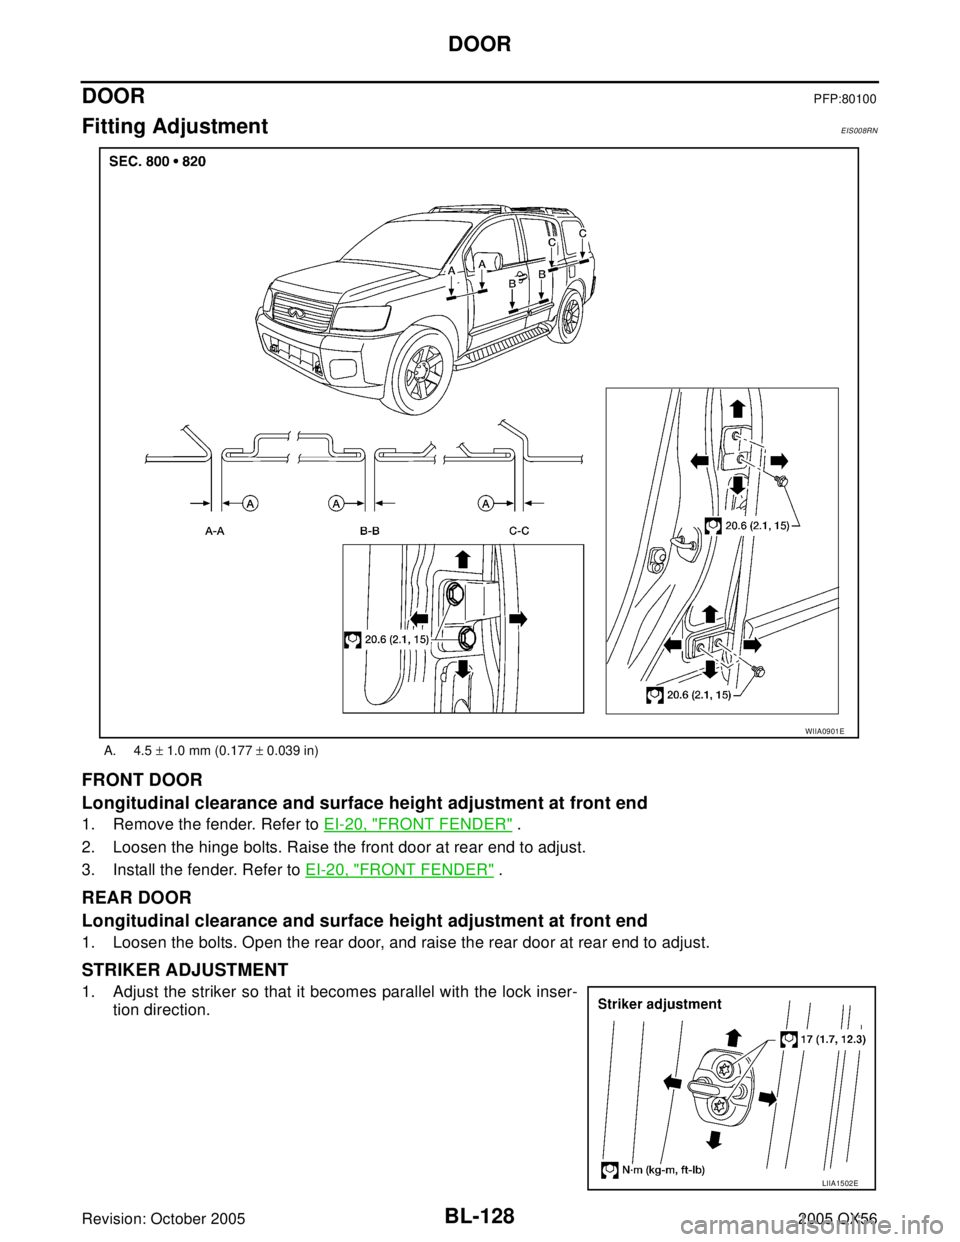 INFINITI QX4 2005  Factory Service Manual BL-128
DOOR
Revision: October 20052005 QX56
DOORPFP:80100
Fitting AdjustmentEIS008RN
FRONT DOOR
Longitudinal clearance and surface height adjustment at front end
1. Remove the fender. Refer to EI-20, 